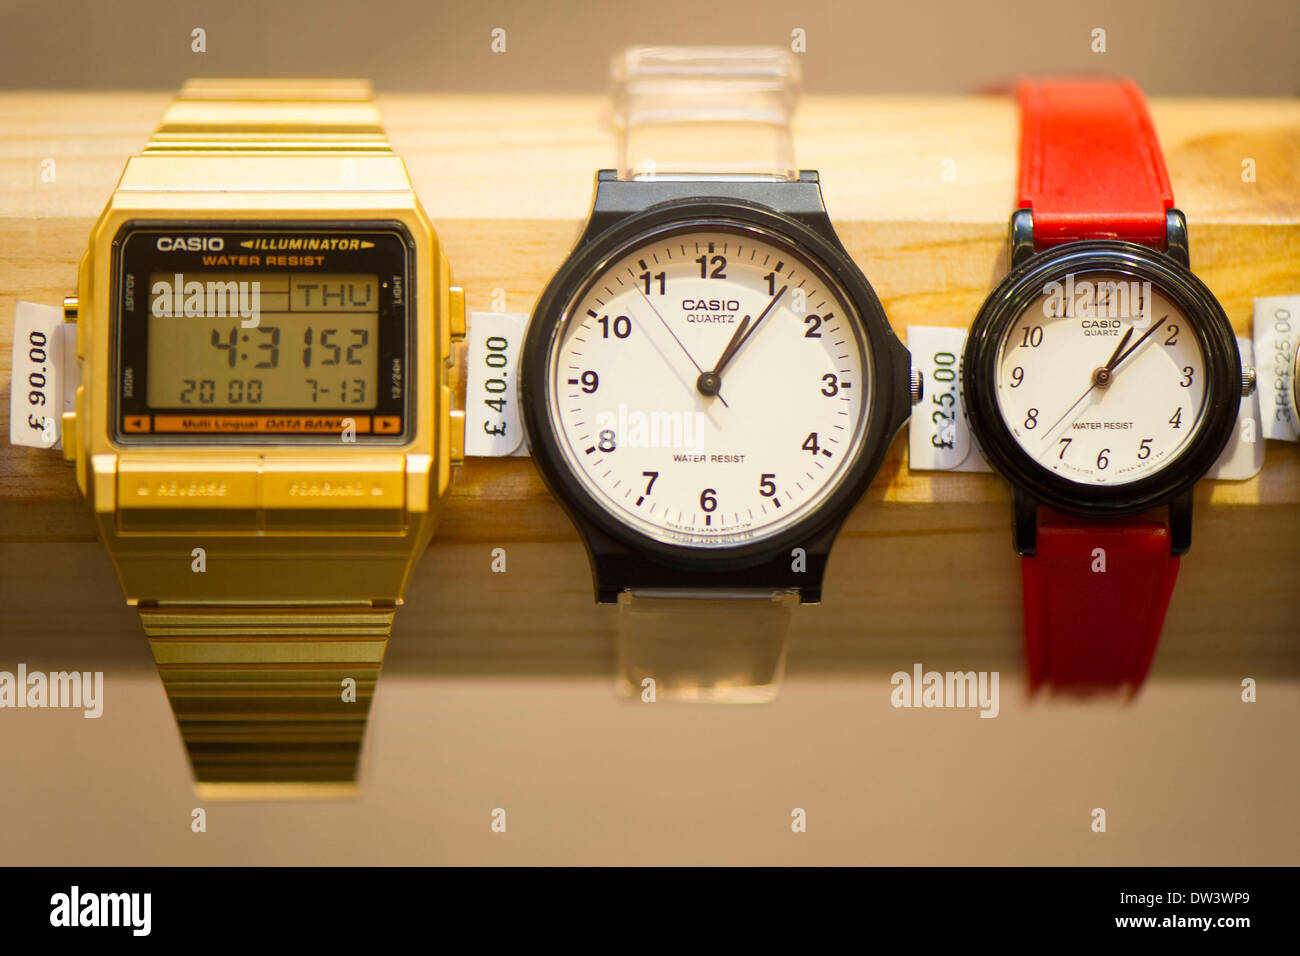 Selection of watches on sale in a shop. Stock Photo